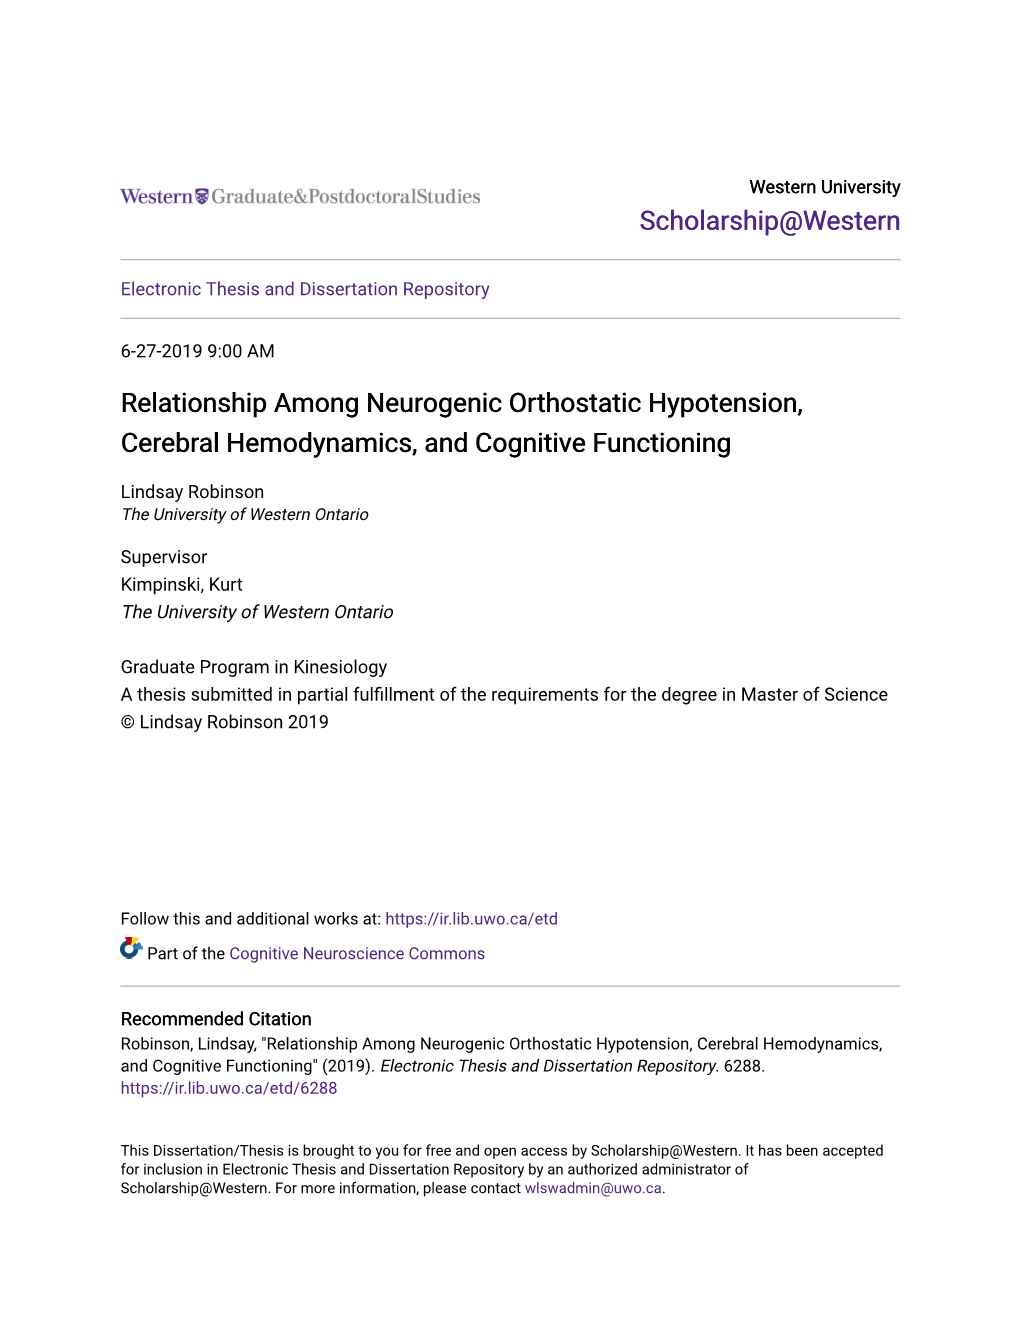 Relationship Among Neurogenic Orthostatic Hypotension, Cerebral Hemodynamics, and Cognitive Functioning